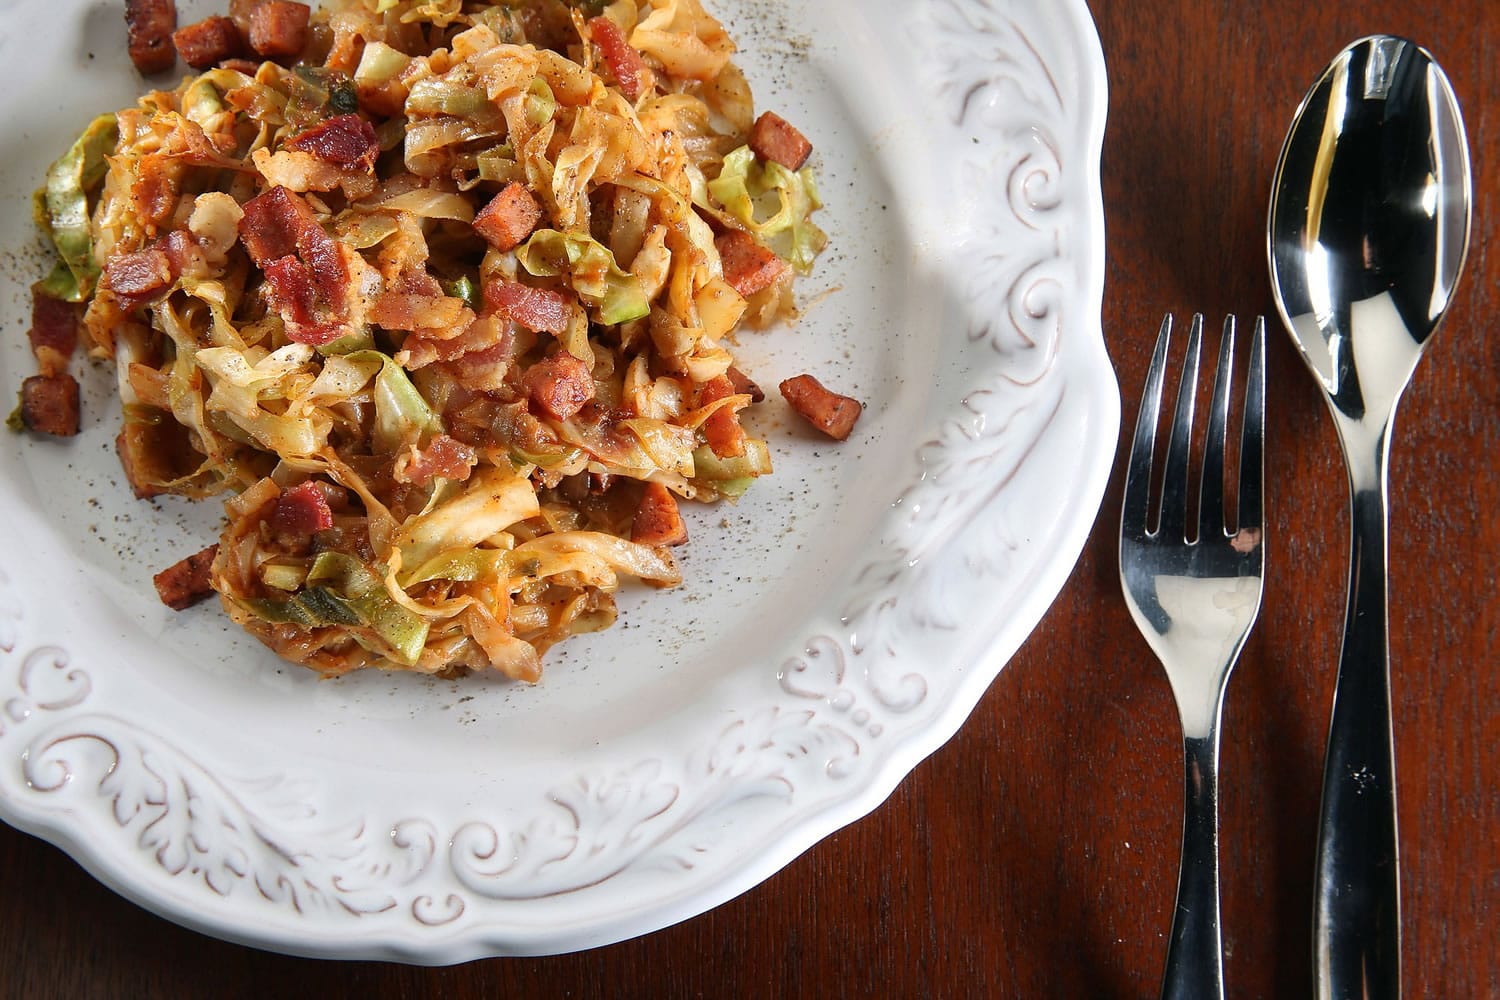 Cabbage shines with help from savory friends: andouille sausage, bacon and onions.